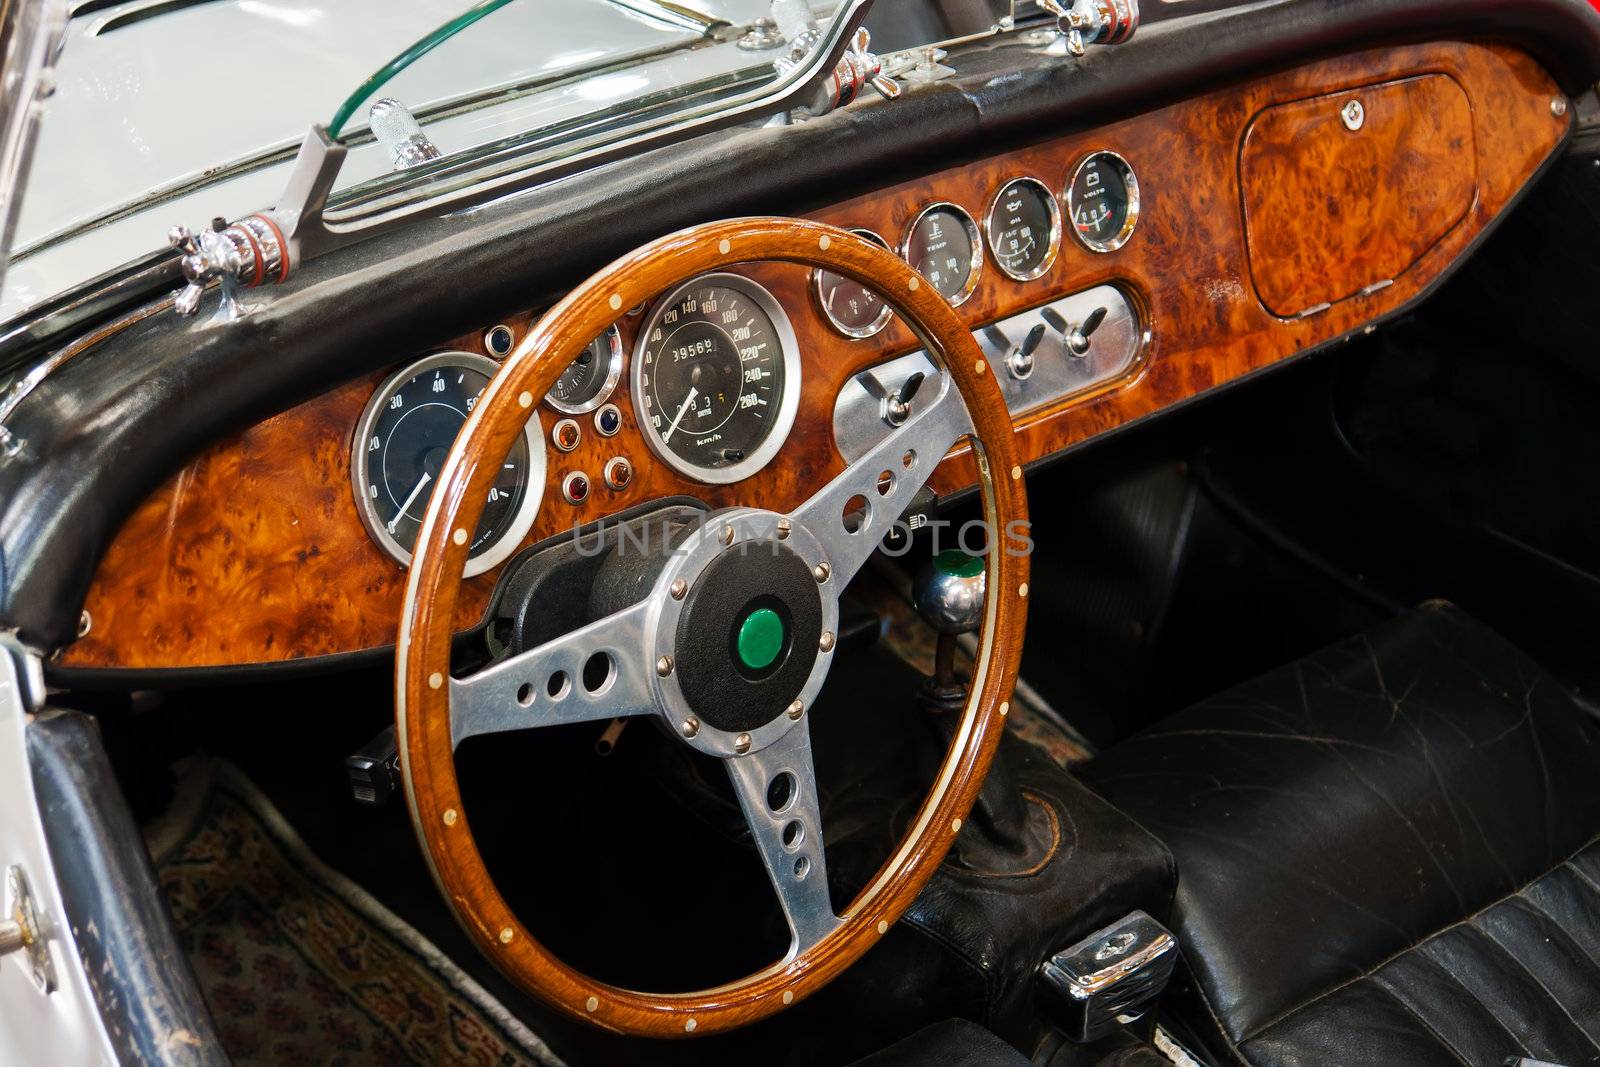 Interior and dashboard on a vintage sports car by Ronyzmbow